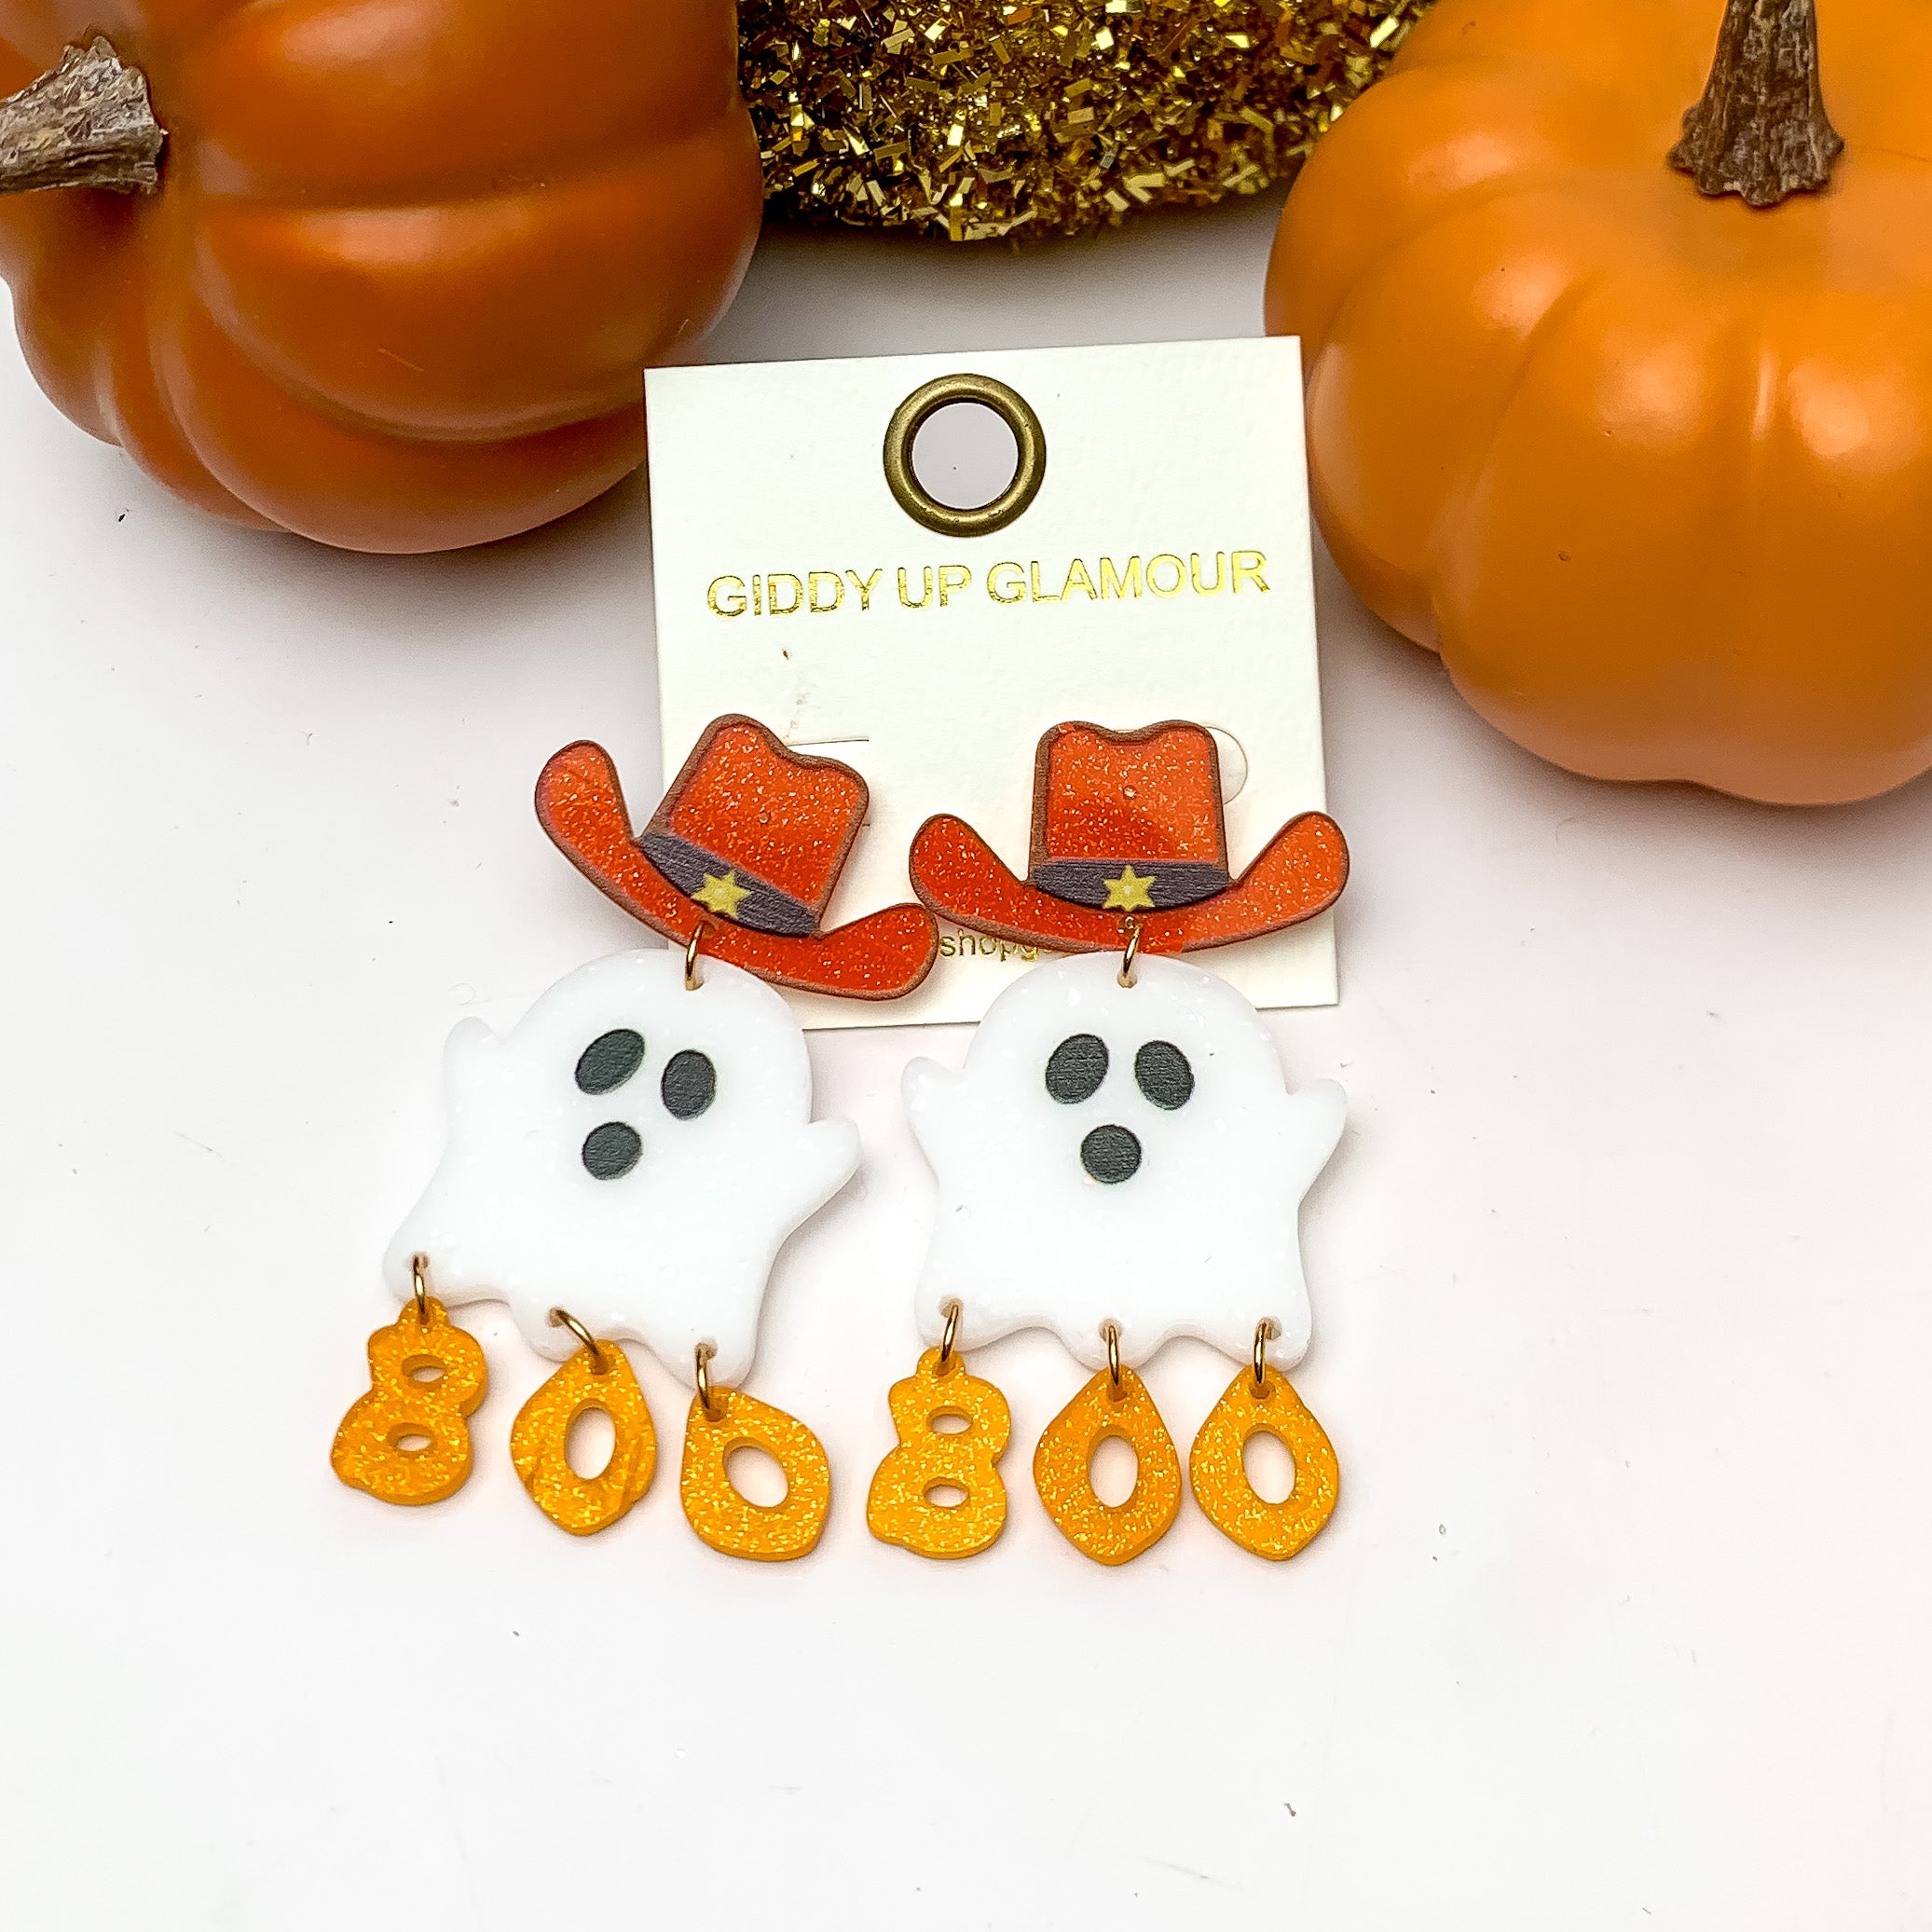 Halloween Ghost Earrings With Dangling Boo Letters. These earrings are pictured on a white background with pumpkins behind the earrings.